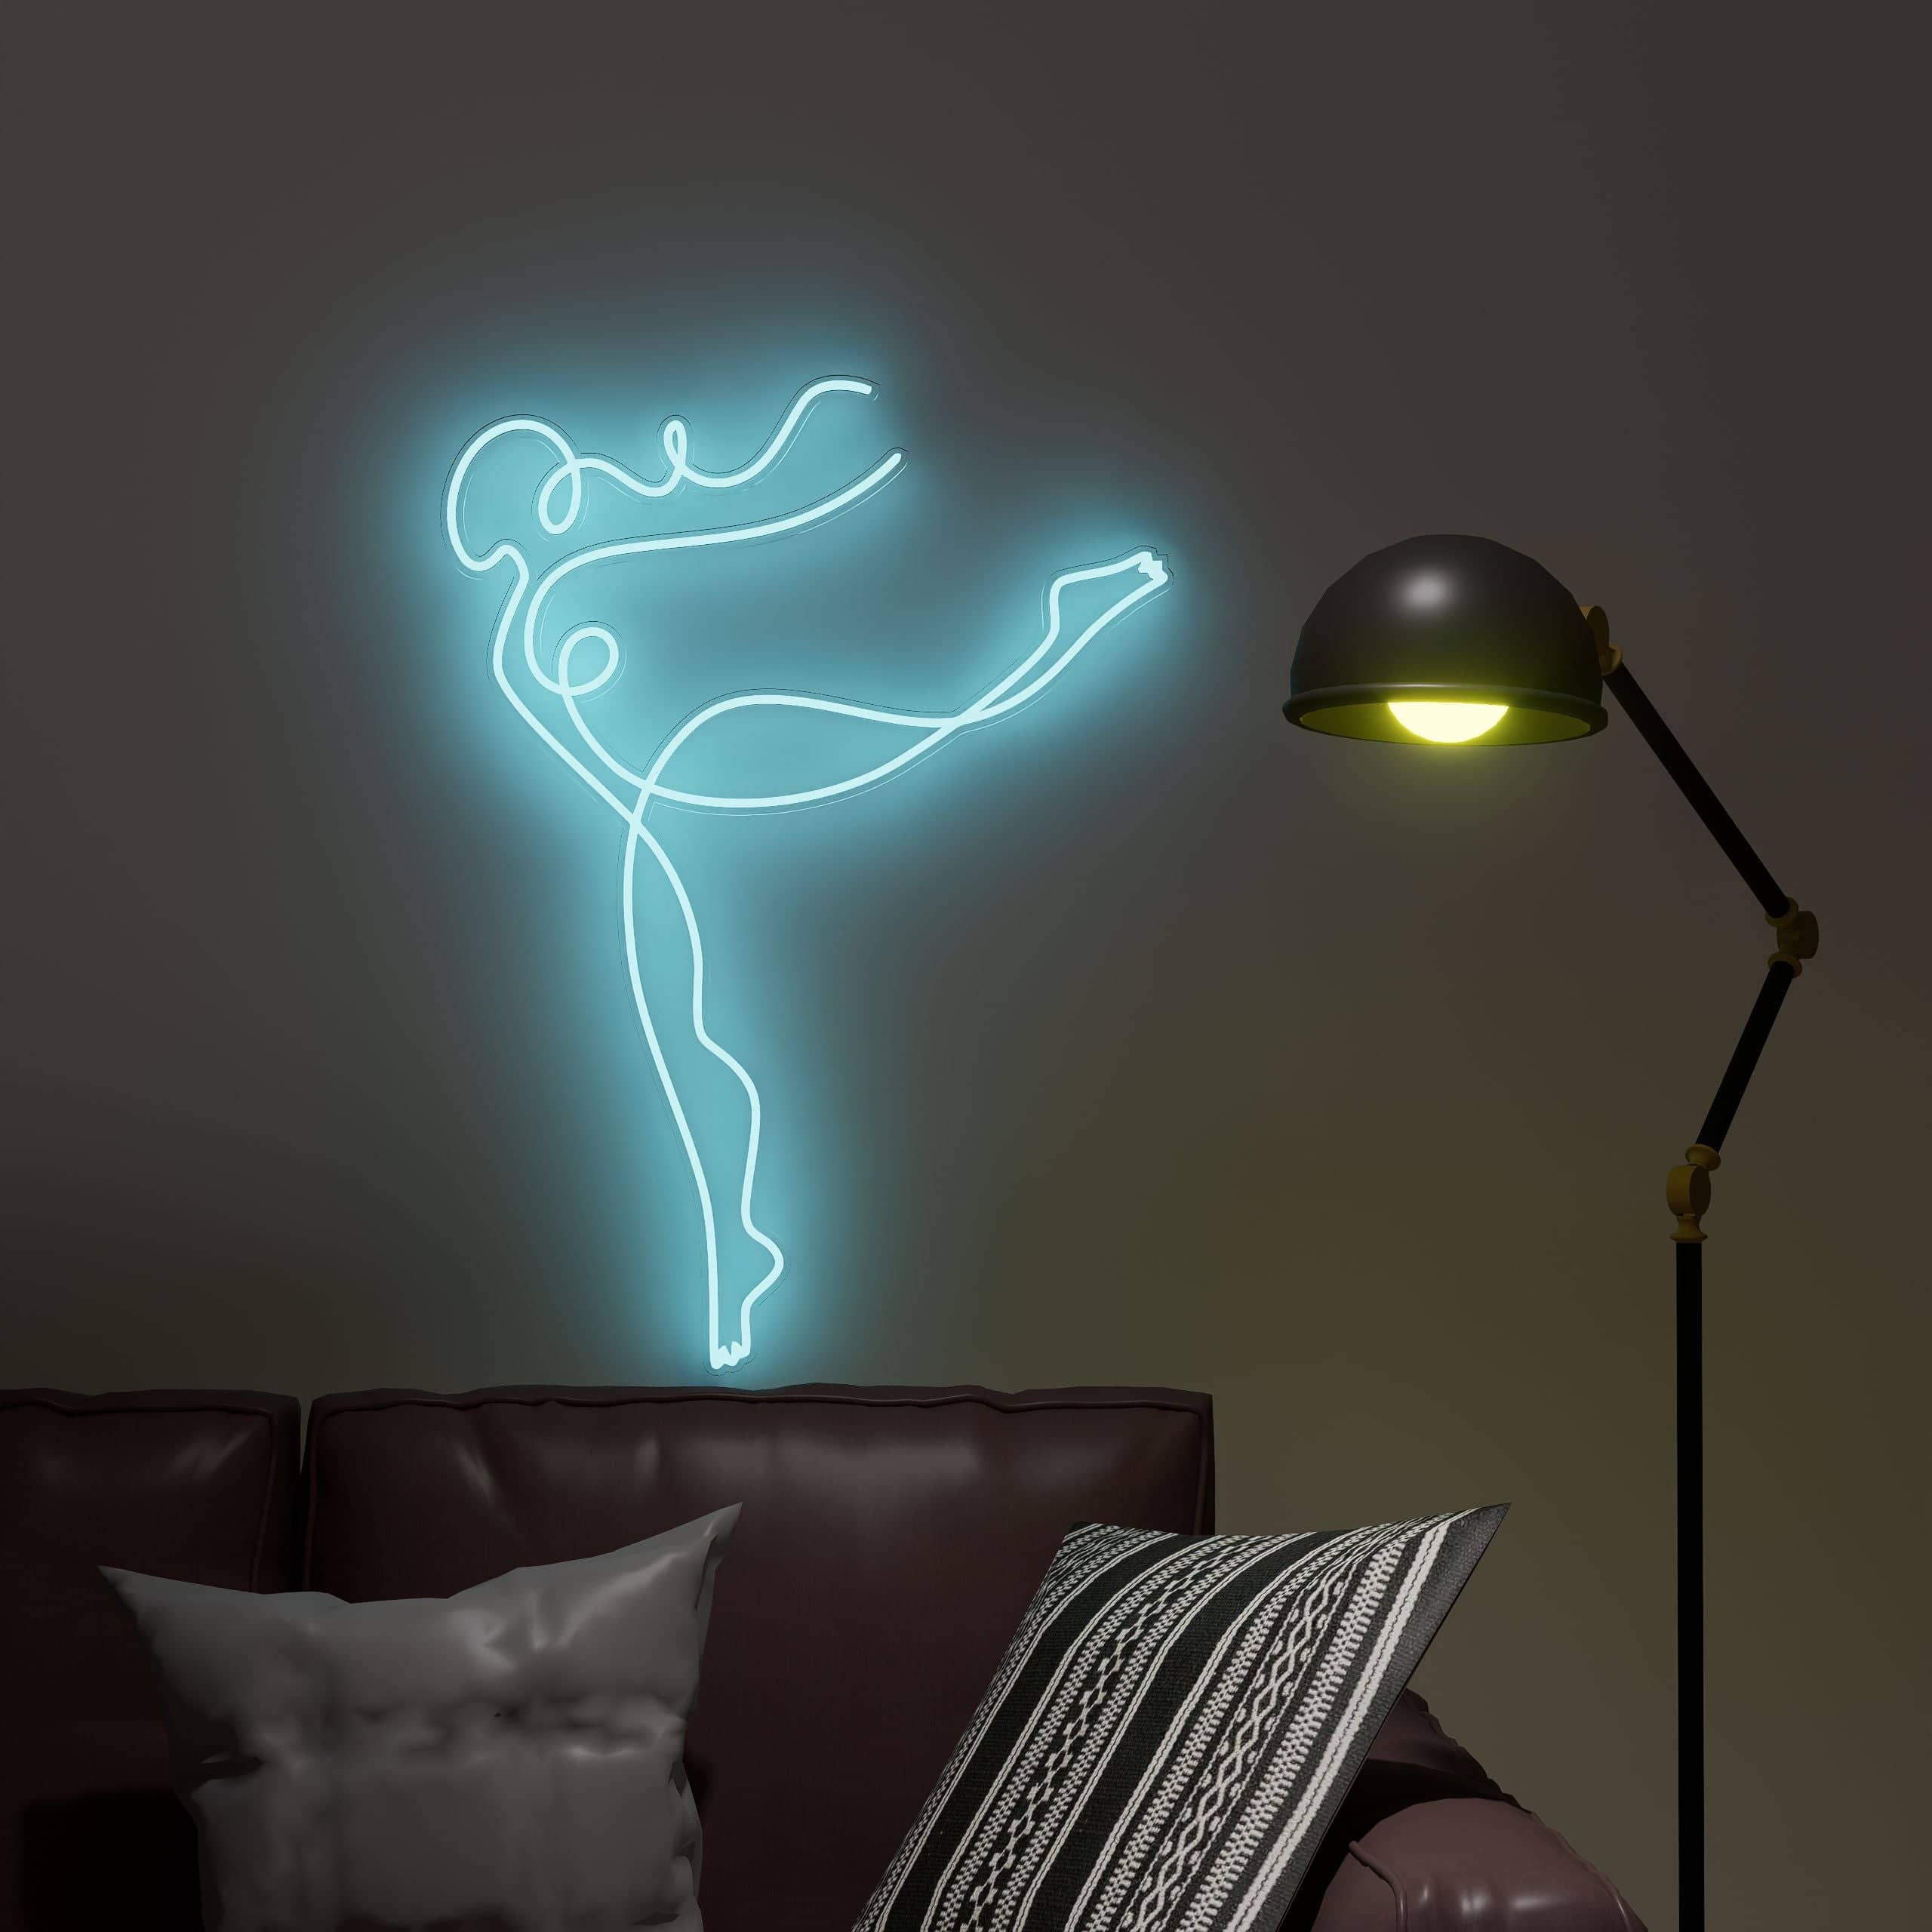 Graceful Dancer Neon Sign illuminates a room with vibrant dance-inspired light